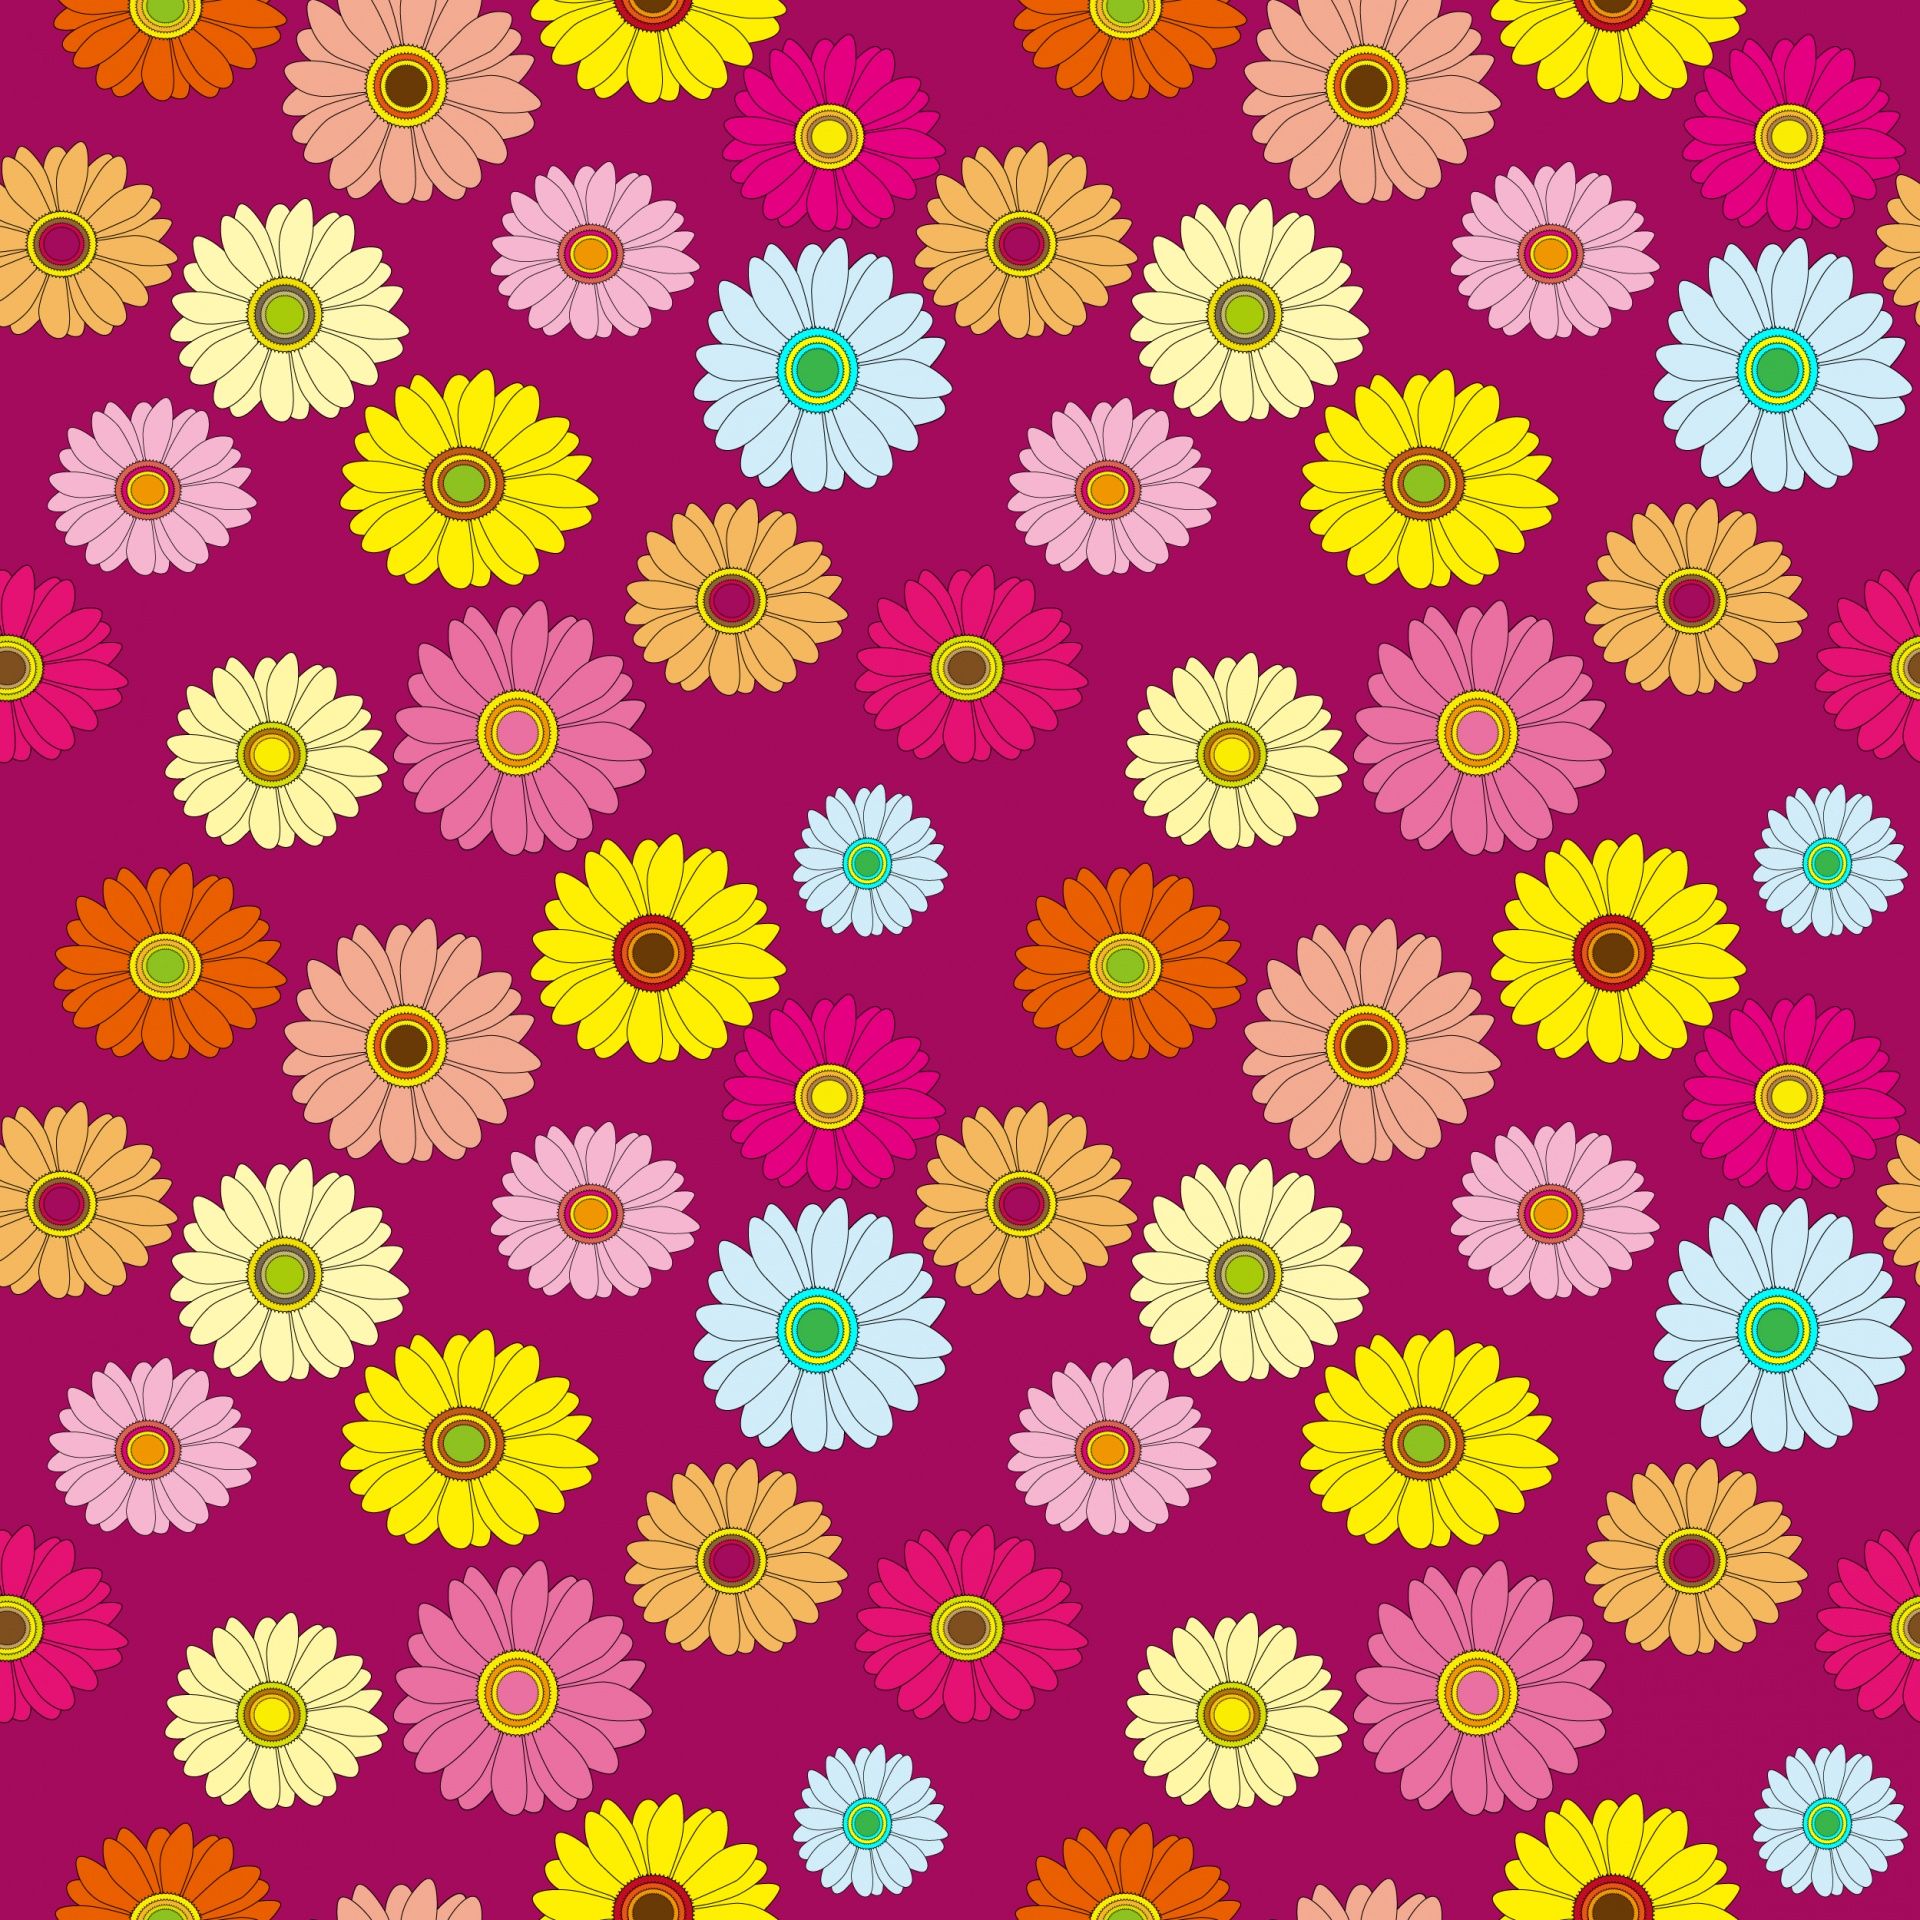 Floral Pattern Wallpapers - 4k, HD Floral Pattern Backgrounds on